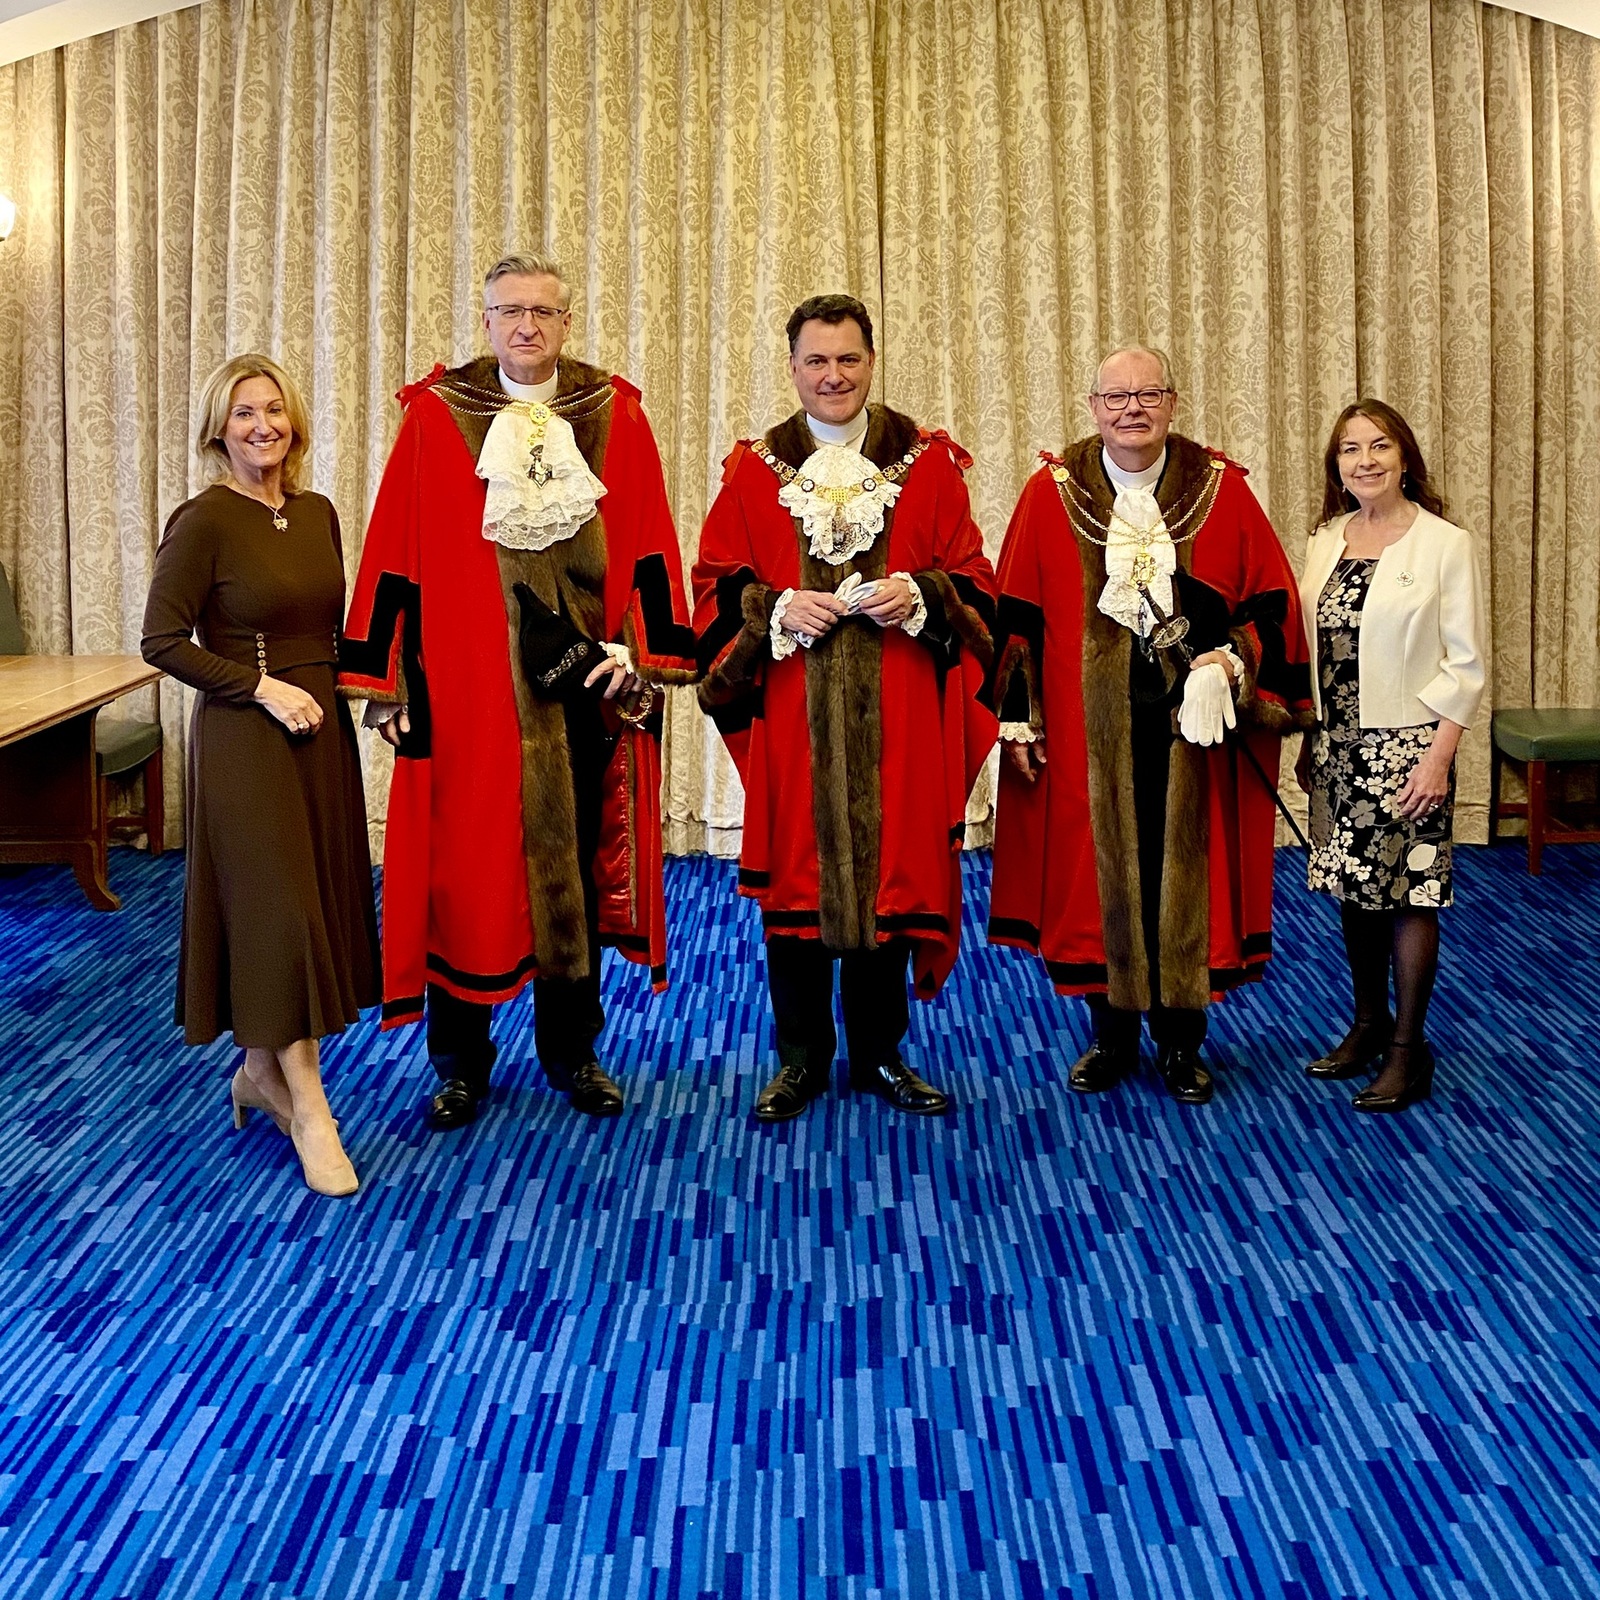 13 Oct 22 - Opening of the Central Criminal Courts with the Lord Mayor